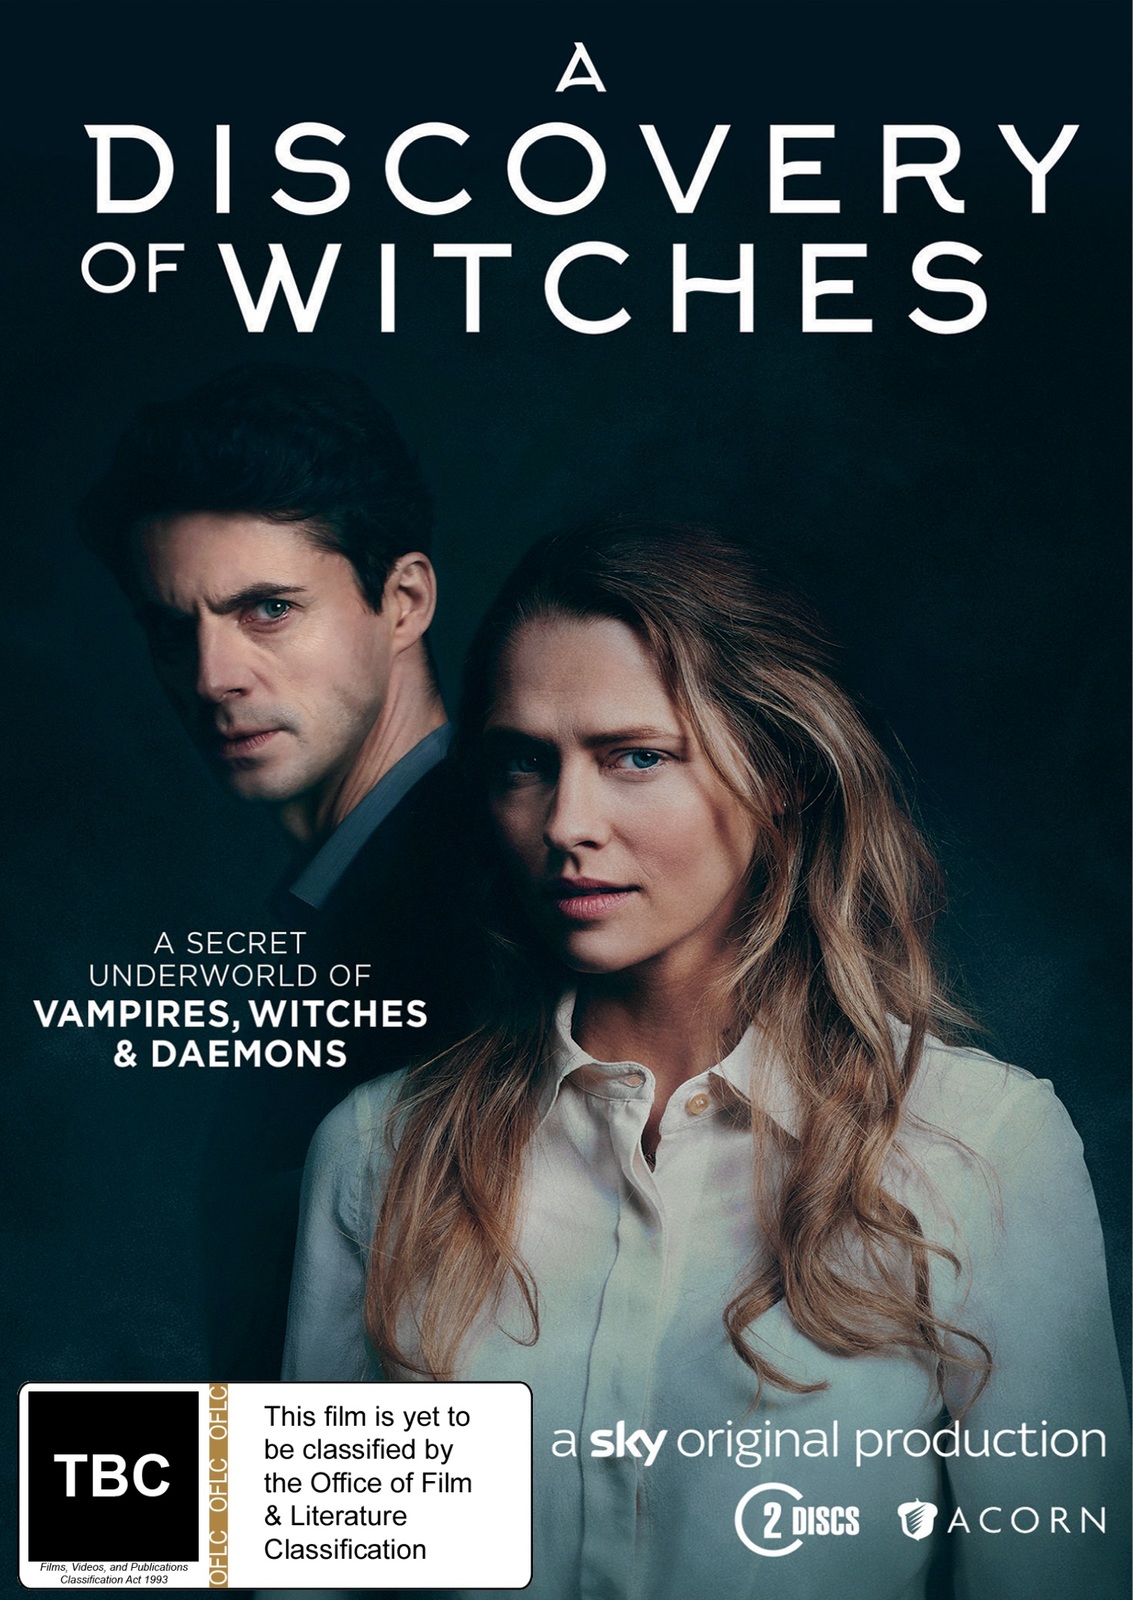 A Discovery of Witches Season One Review - Your Next Supernatural Binge